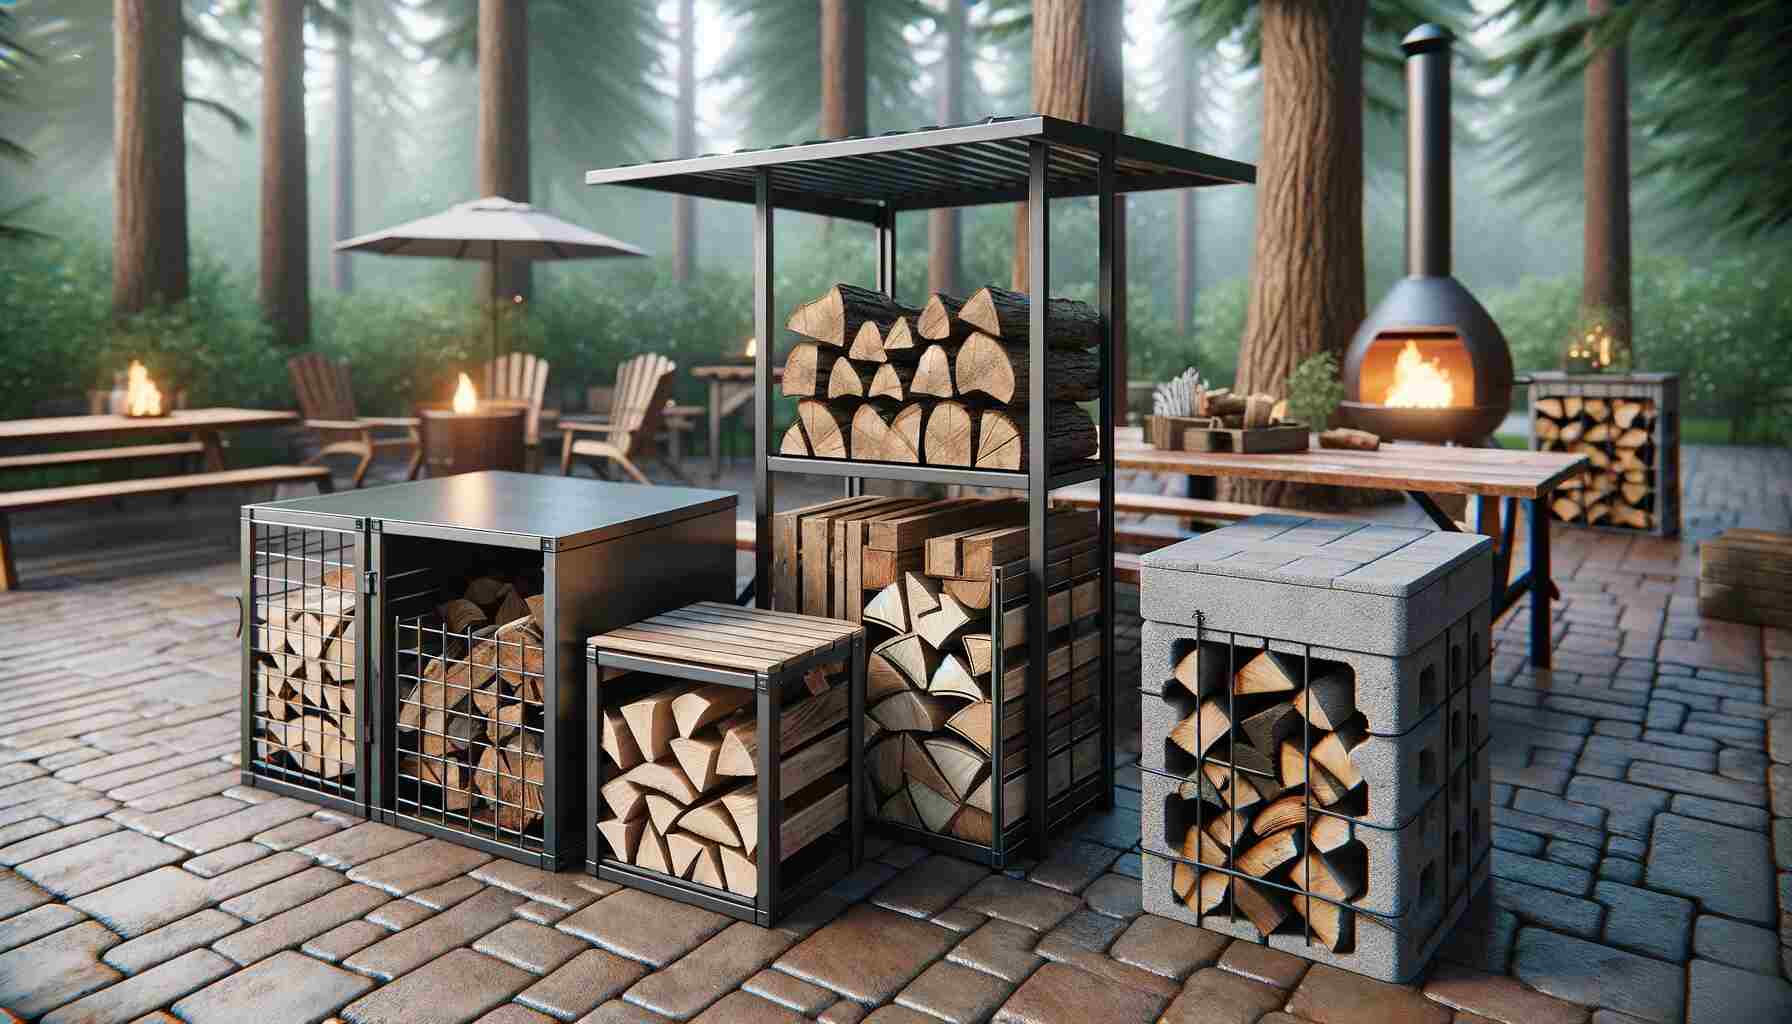 Variety of outdoor firewood racks, including a steel rack with a cover, a wooden pallet rack, and a cinder block and plank rack, neatly stacked with firewood in a rustic outdoor setting with trees and a cozy fire pit area.